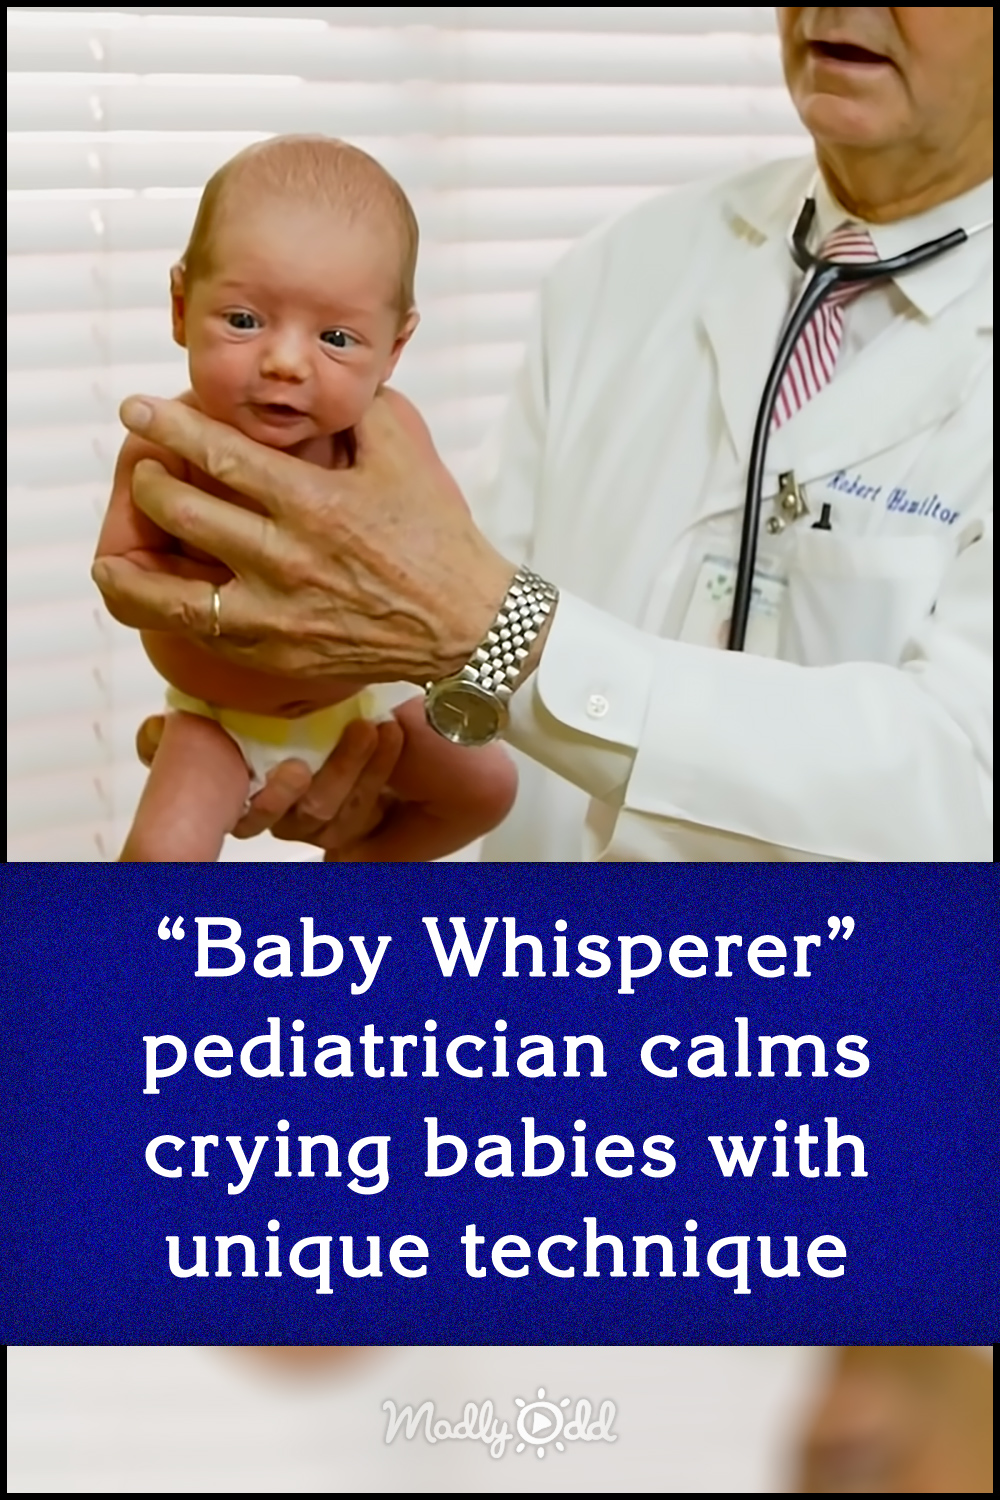 “Baby Whisperer” pediatrician calms crying babies with unique technique